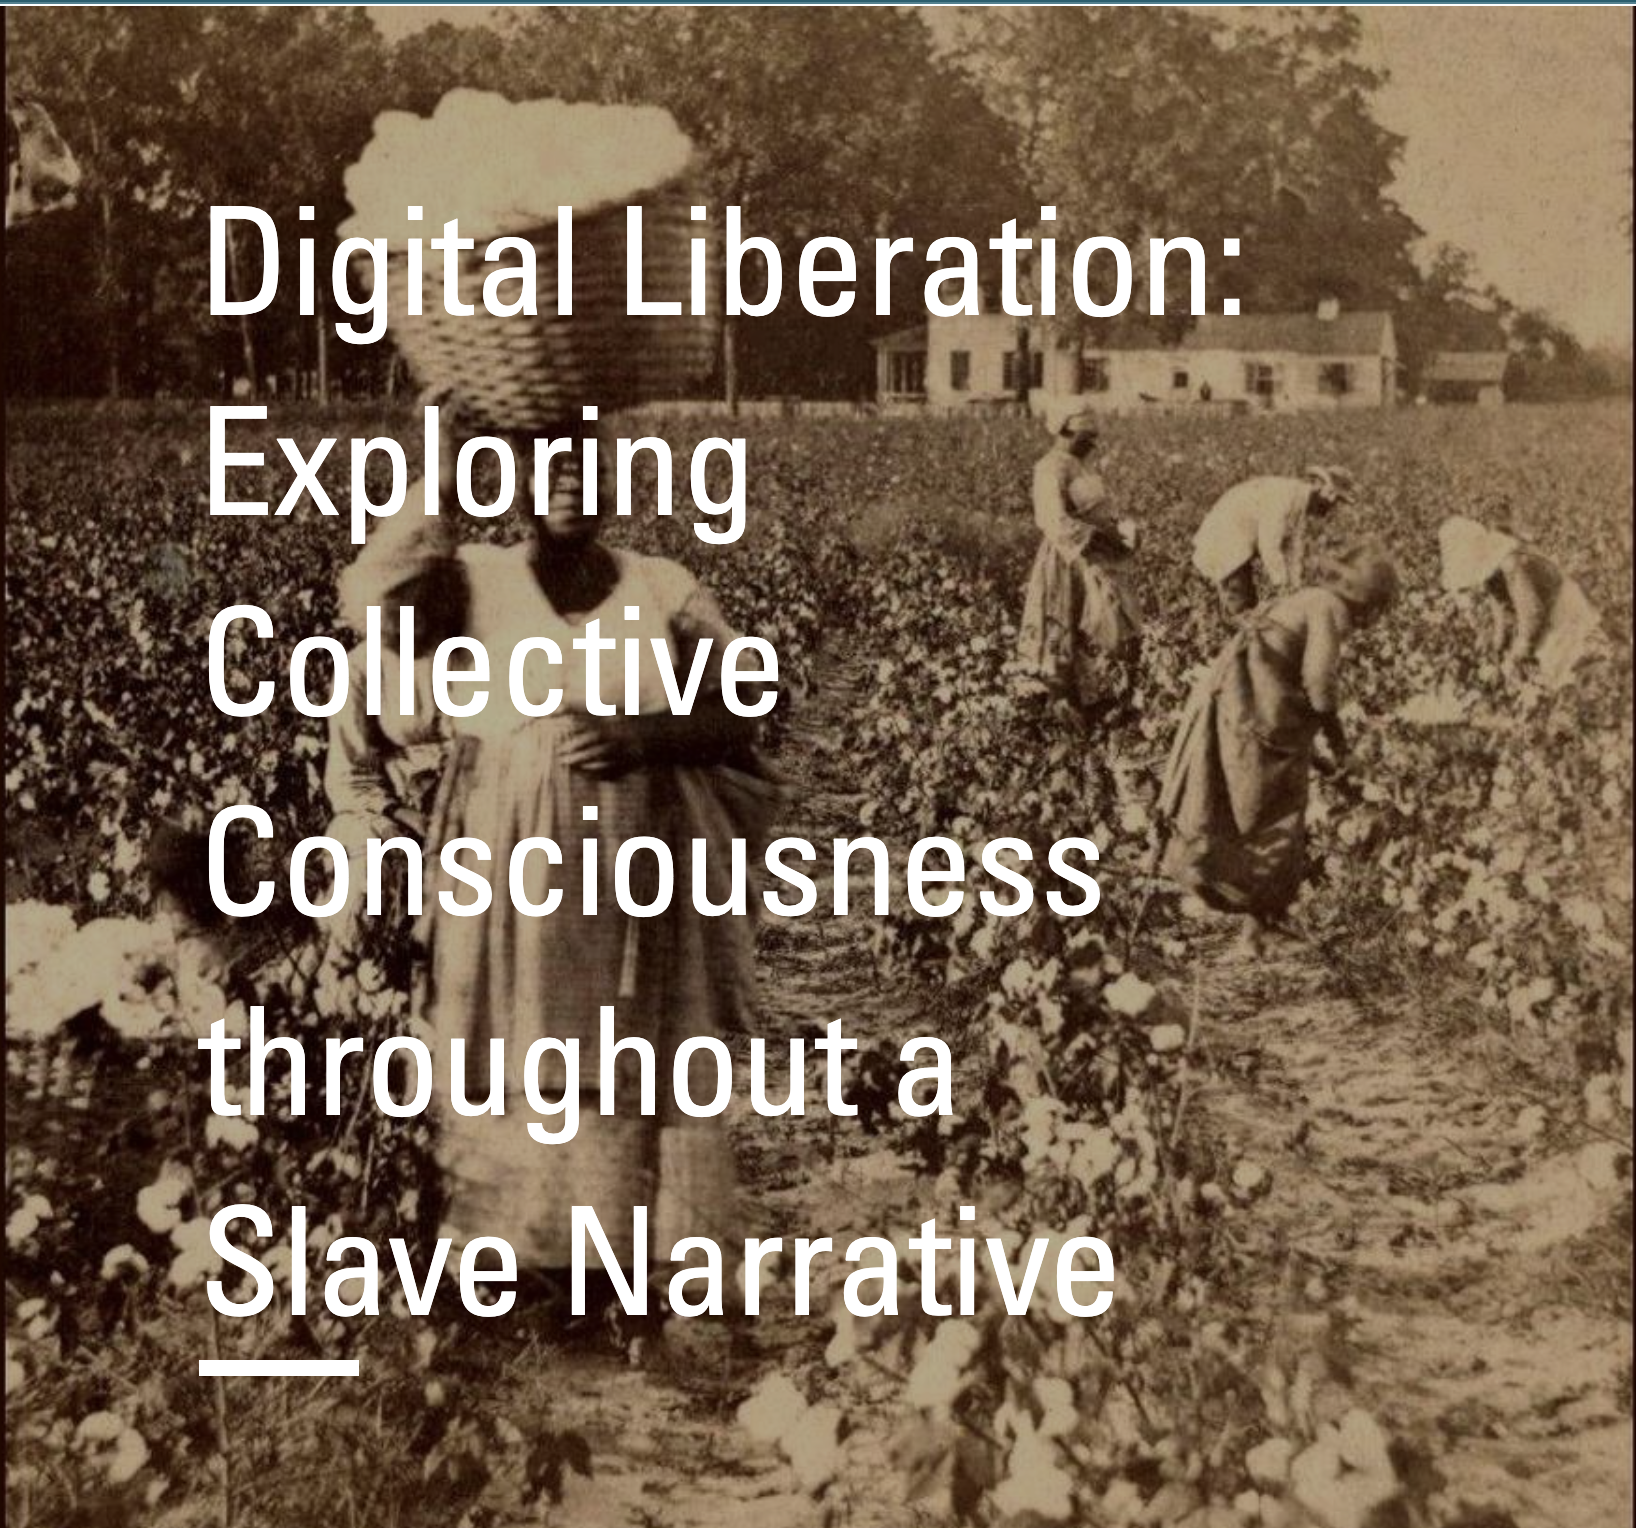 Women pick cotton in an old picture, title reads "digital liberation: exploring collective consciousness through a slave narrative